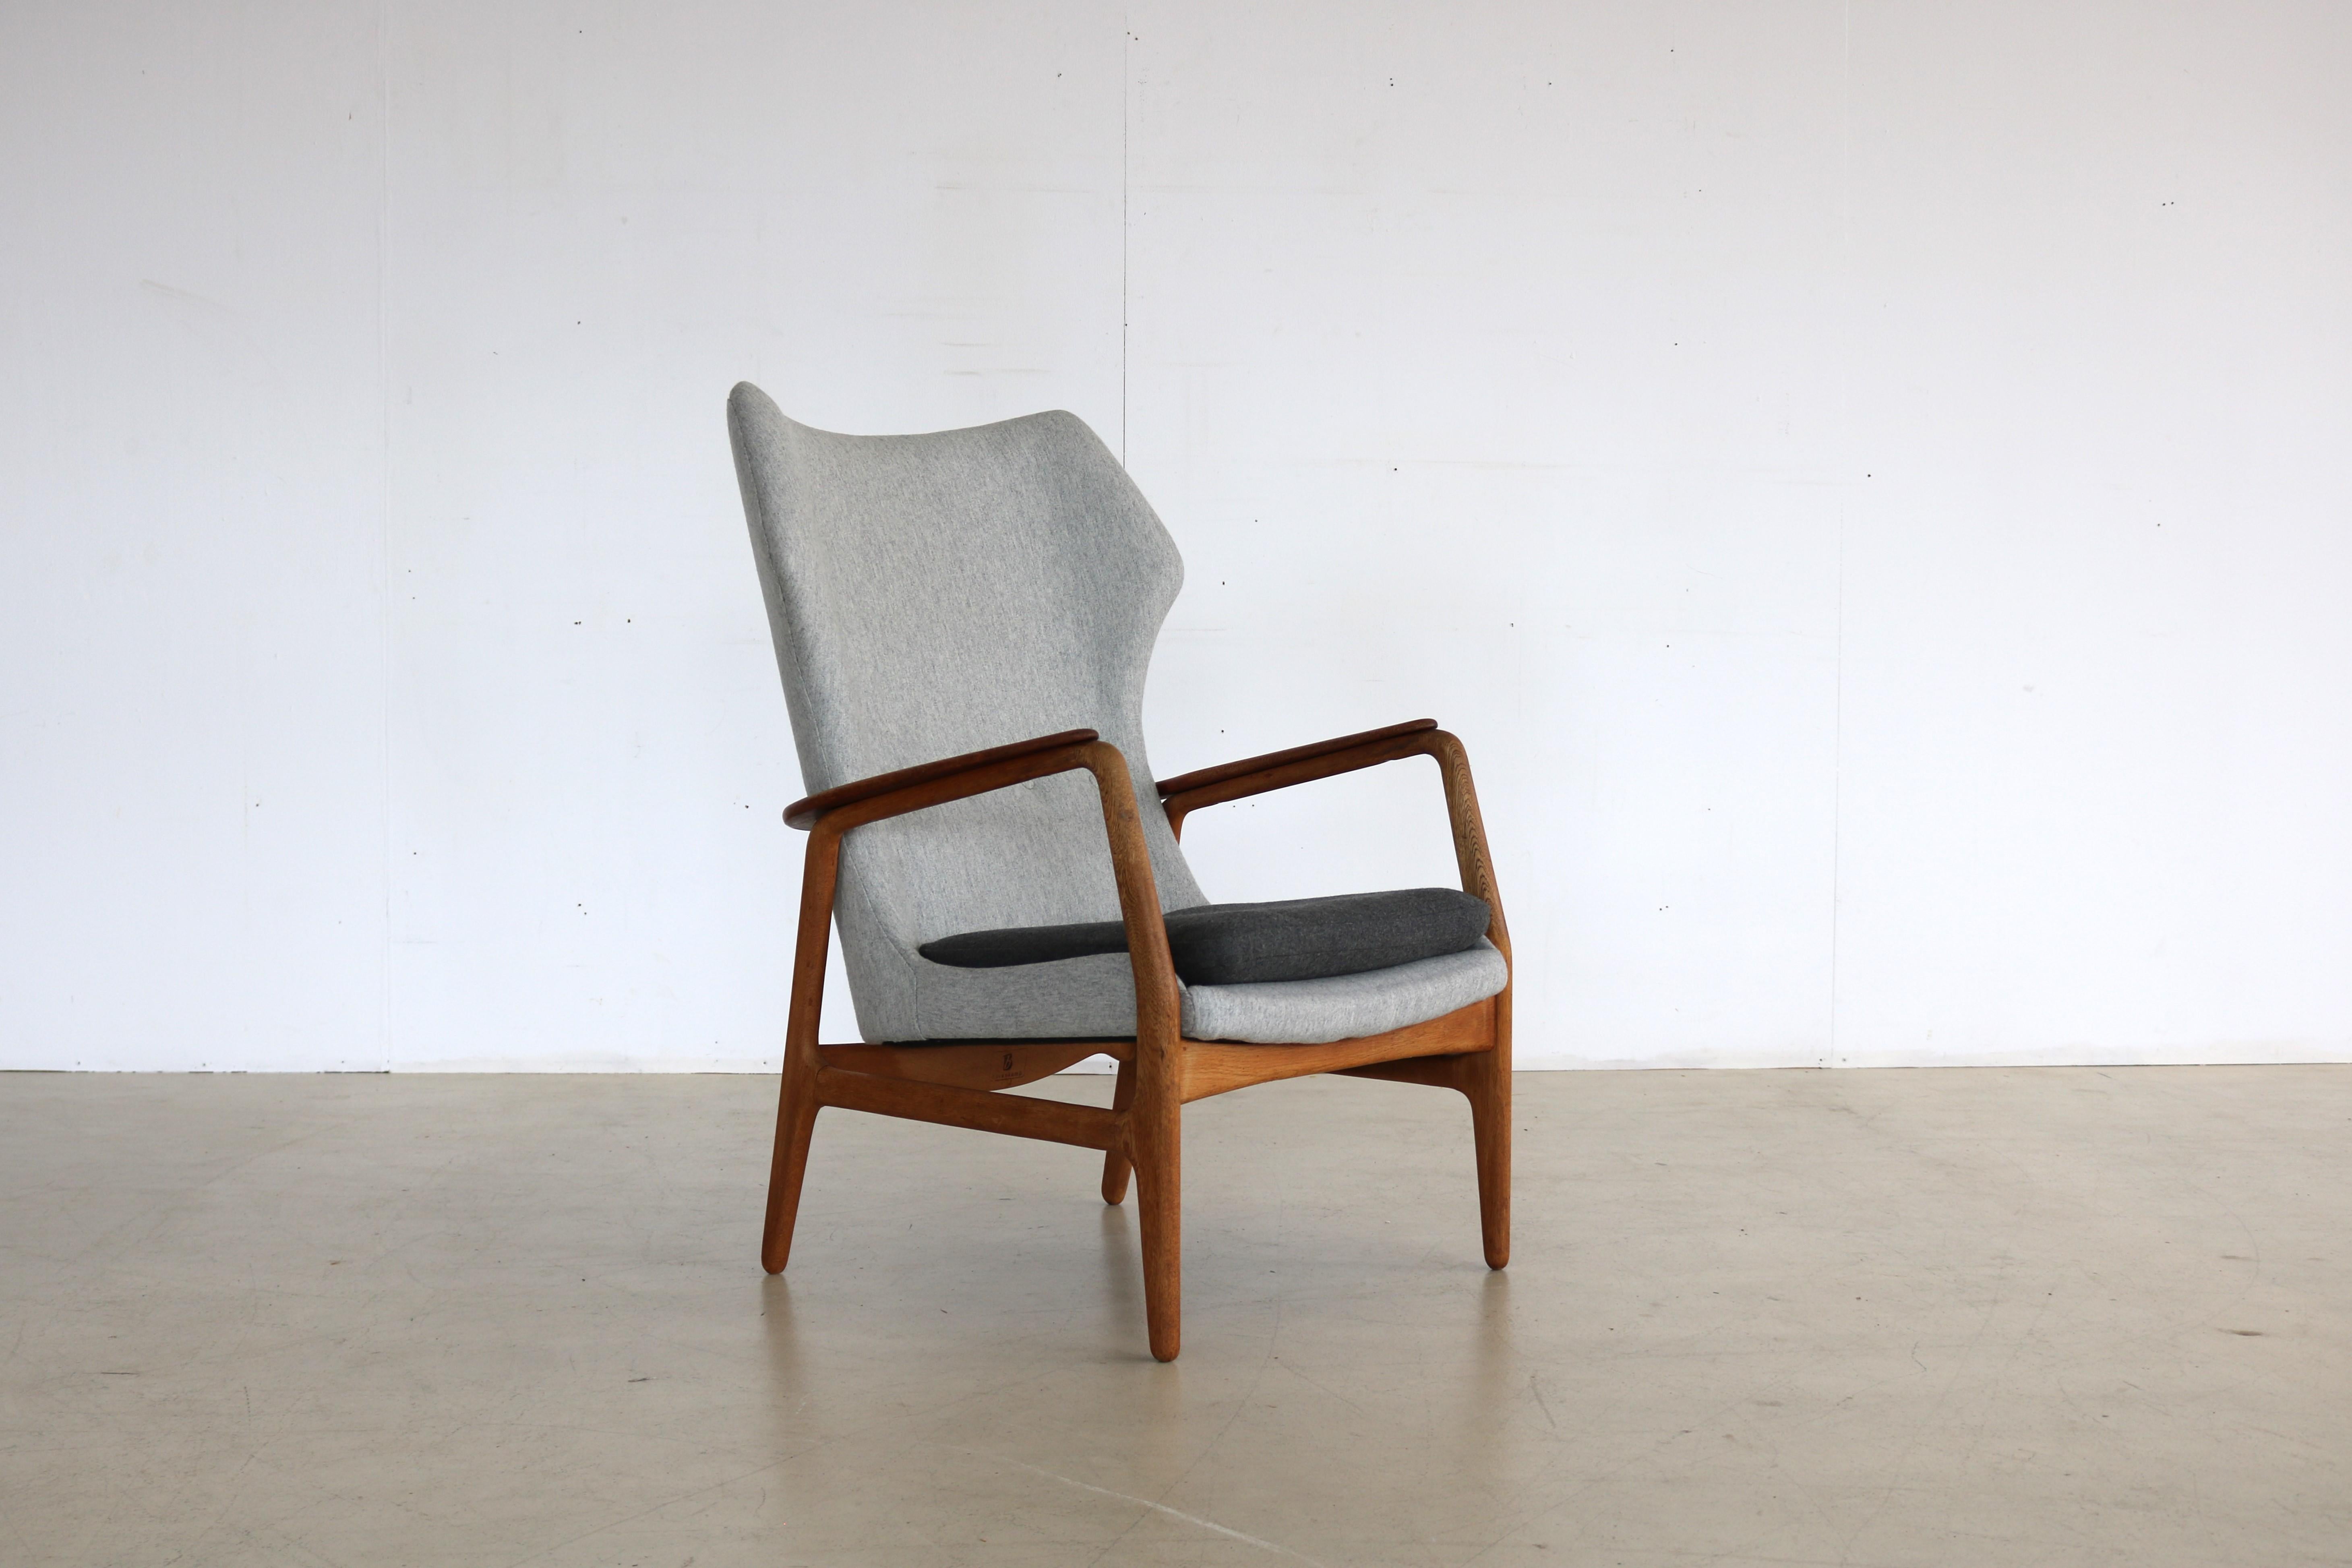 vintage armchair  easy chair  Bovenkamp  60's

period  60's
designs  Aksel Bender Madsen  Upper Camp  The Netherlands
conditions  excellent  minimal signs of use  newly upholstered
size  100 x 66 x 80 (hxwxd) seat height 44 cm;

details  oak; teak;